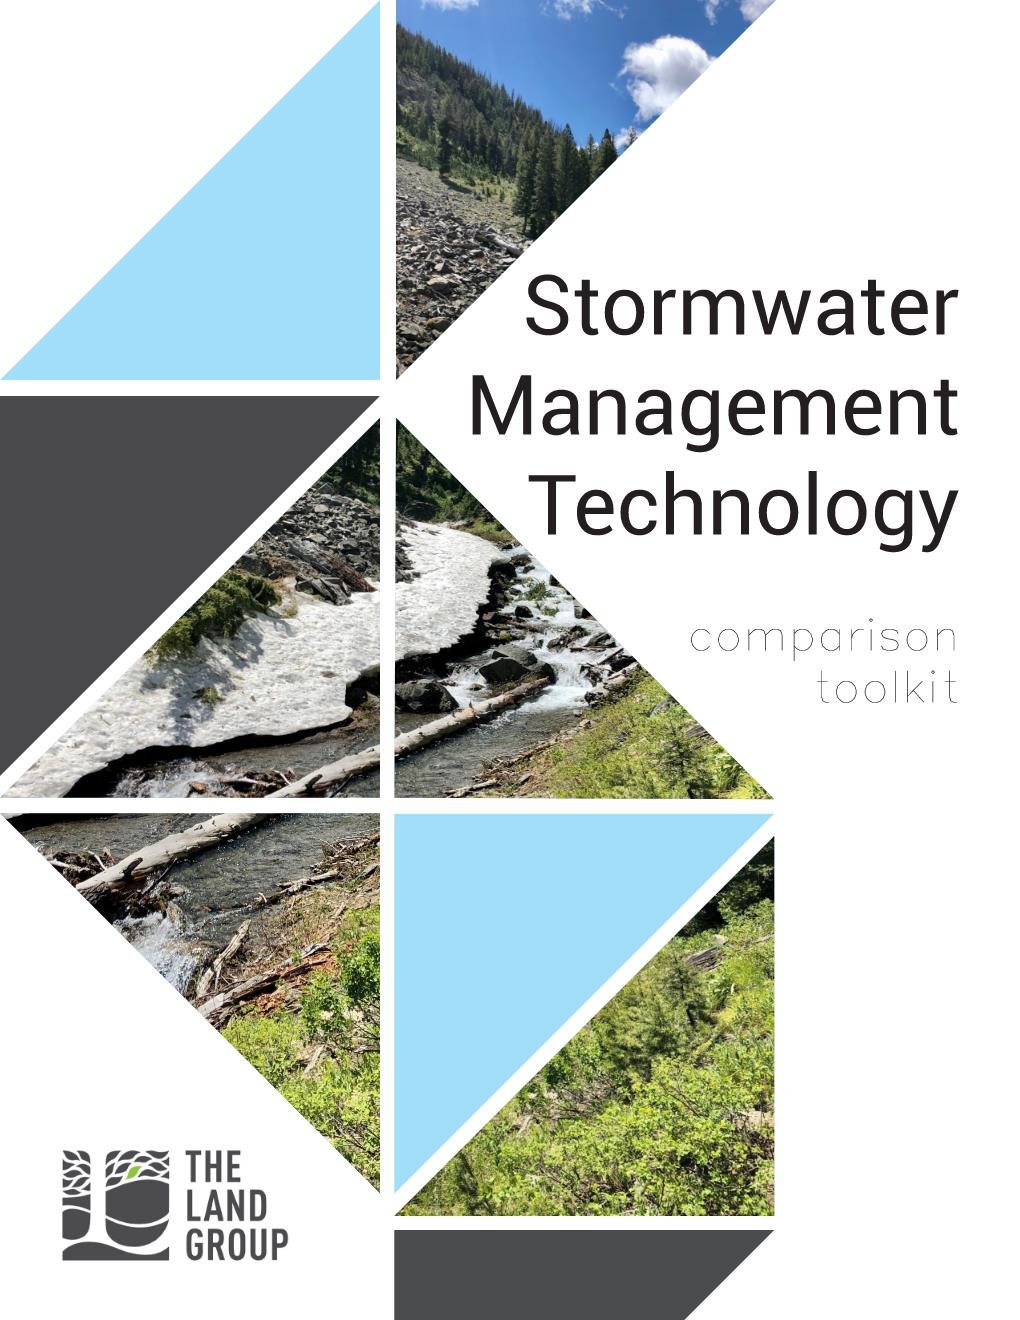 Stormwater Management Technology Comparison Toolkit Page 001.jpg